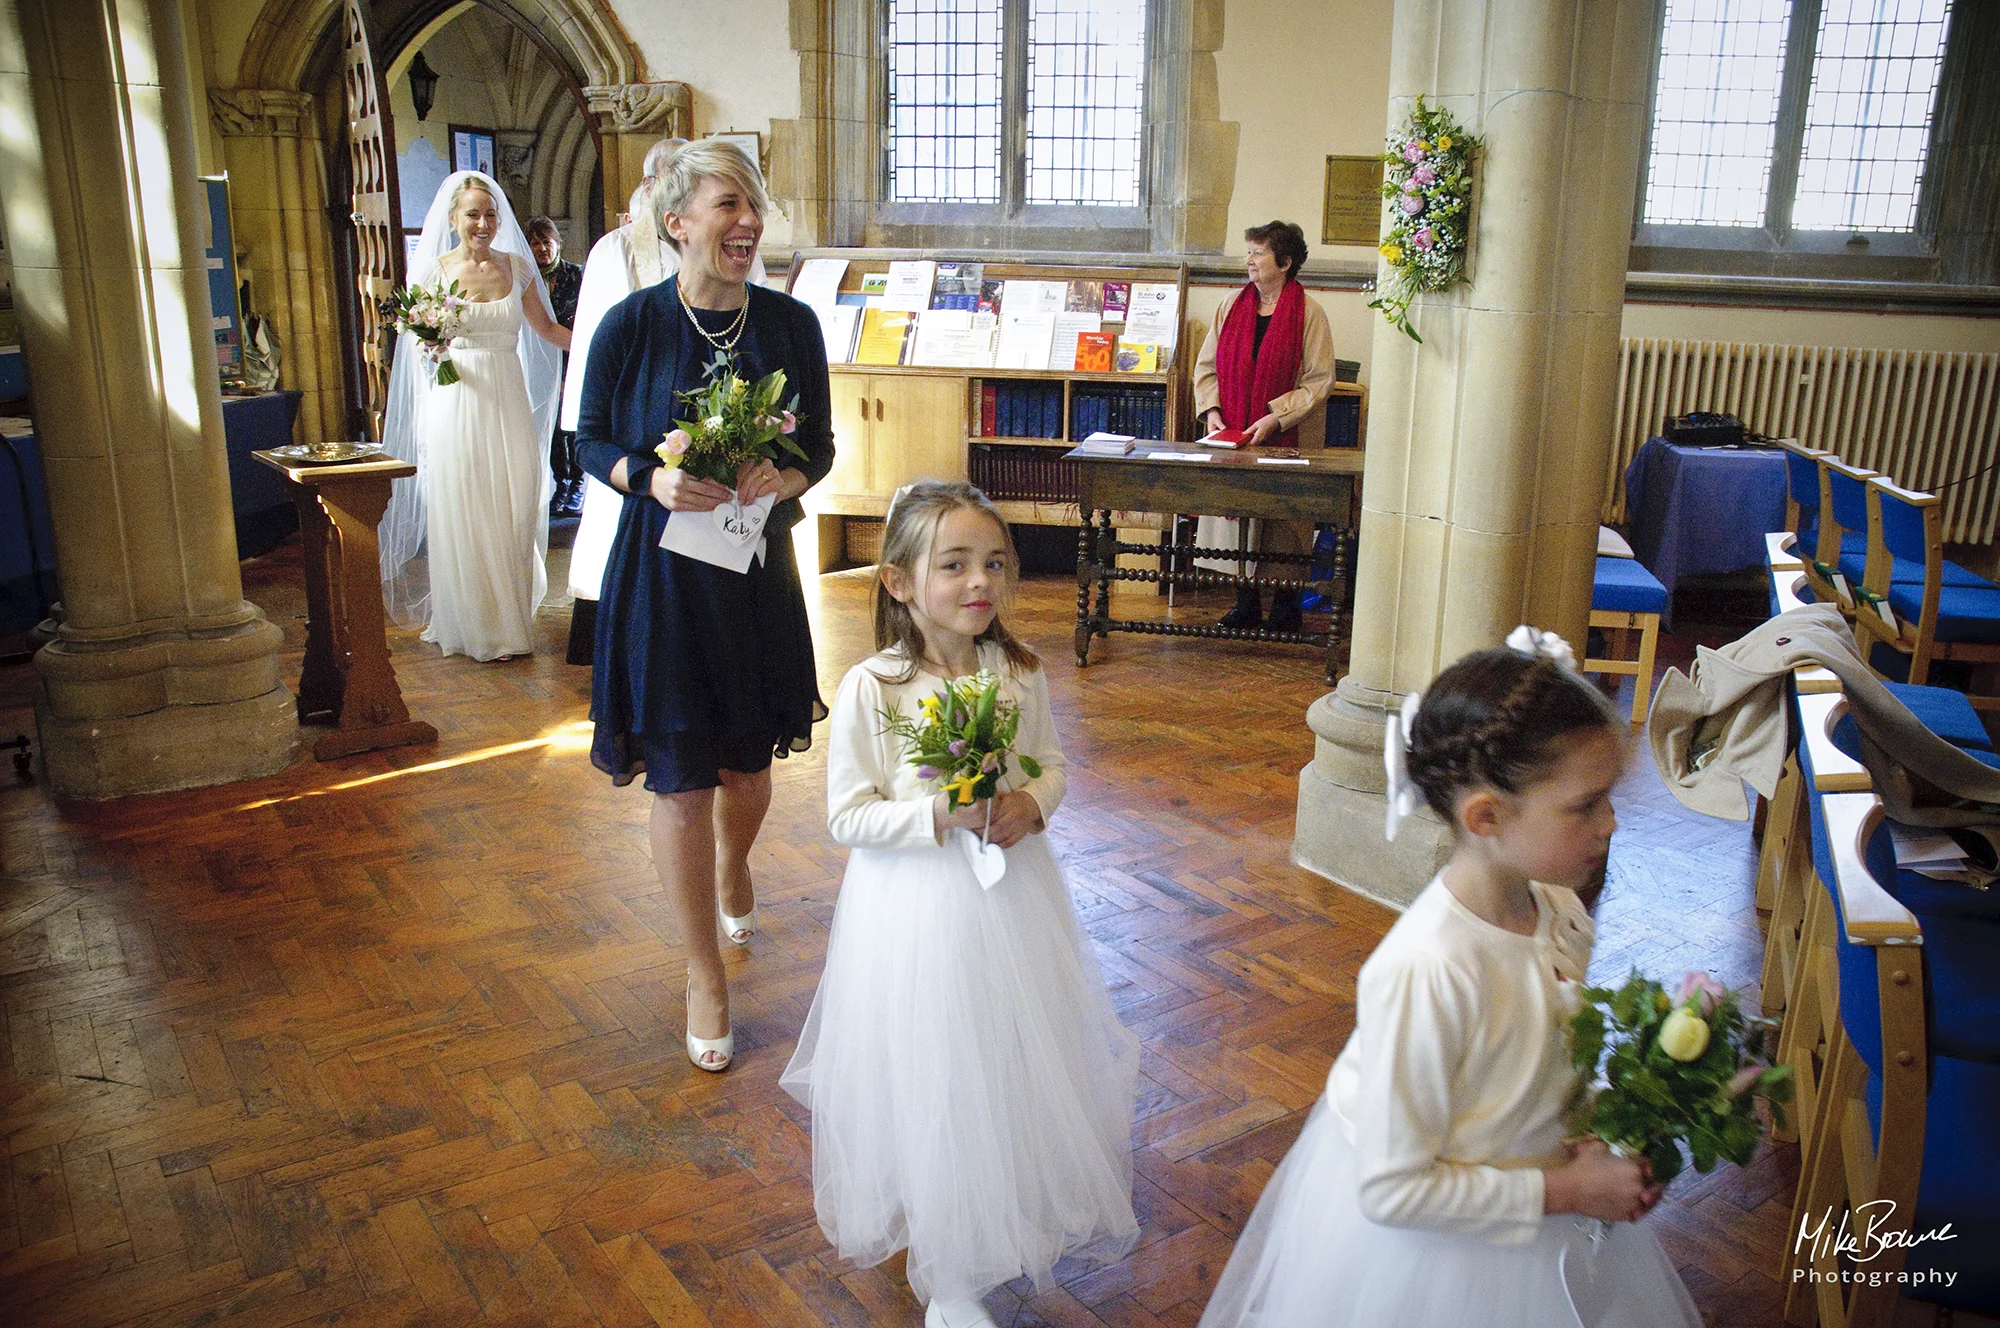 Head bridesmaid laughing as flower girl has cheeky expression